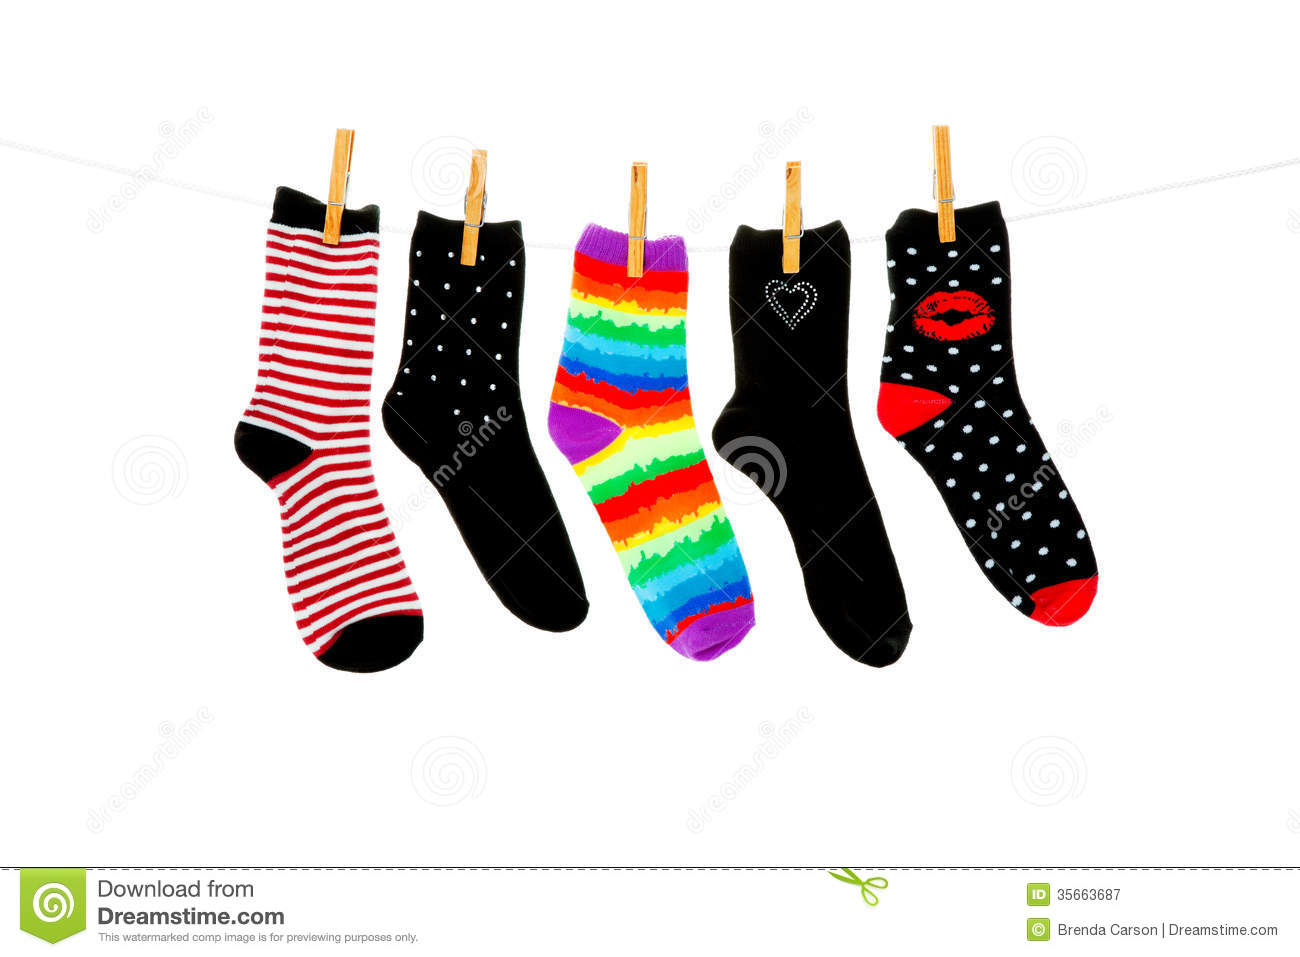 Odd Socks Whose Mates Have Been Lost Hanging On A Clothesline  Shot